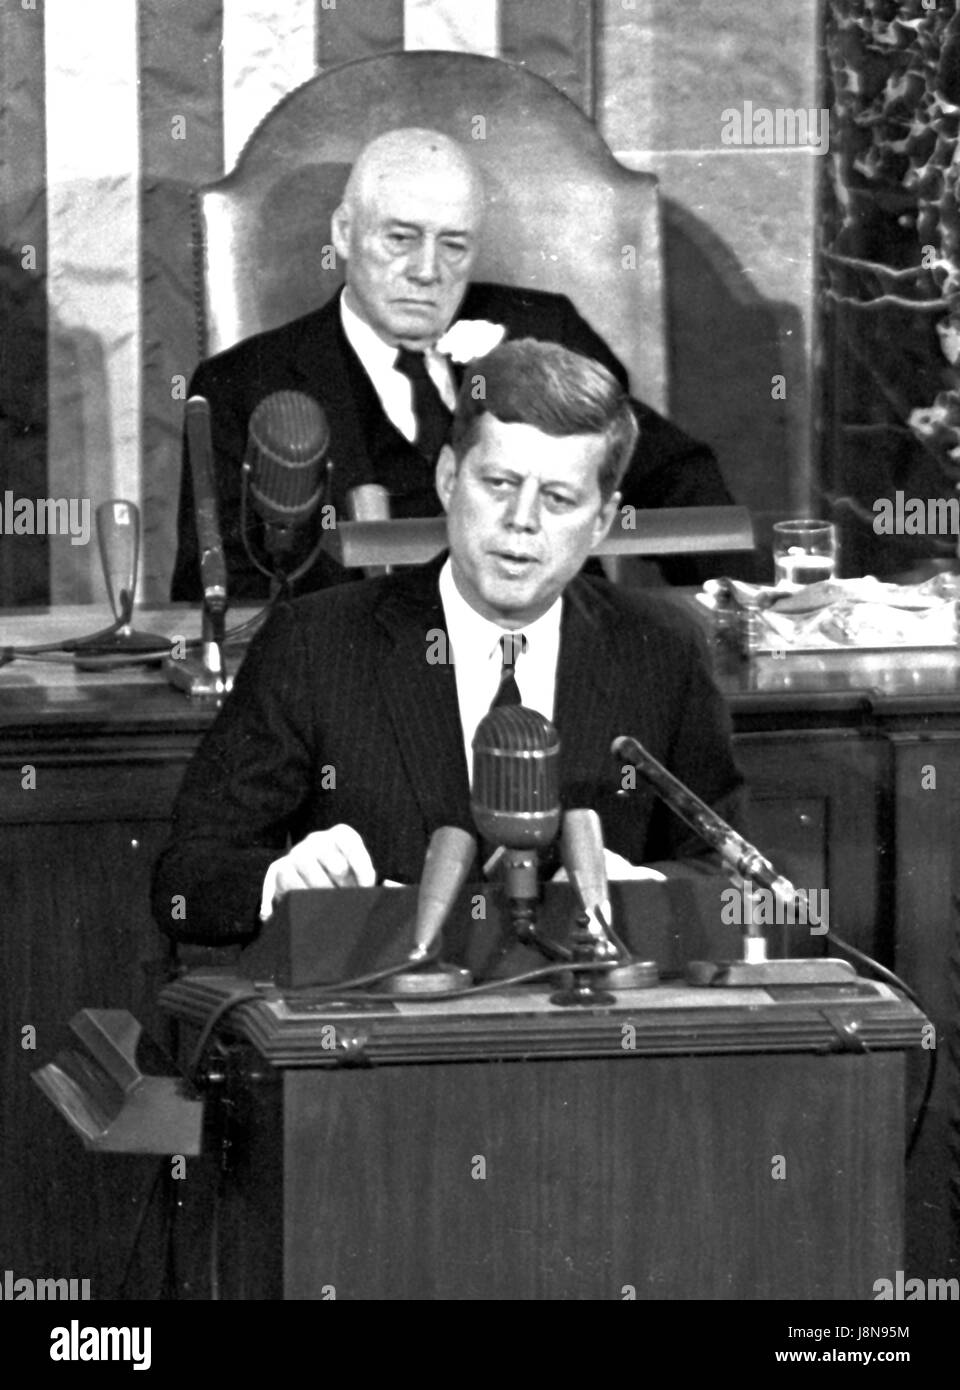 United States President John F. Kennedy outlined his vision for manned exploration of space to a Joint Session of the United States Congress, in Washington, DC on May 25, 1961 when he declared, '...I believe this nation should commit itself to achieving the goal, before this decade is out, of landing a man on the Moon and returning him safely to the Earth.' This goal was achieved when astronaut Neil A. Armstrong became the first human to set foot upon the Moon at 10:56 p.m. EDT, July 20, 1969.  Shown in the background is Speaker of the House Sam T. Rayburn (Democrat of Texas).  Credit: Arnie S Stock Photo